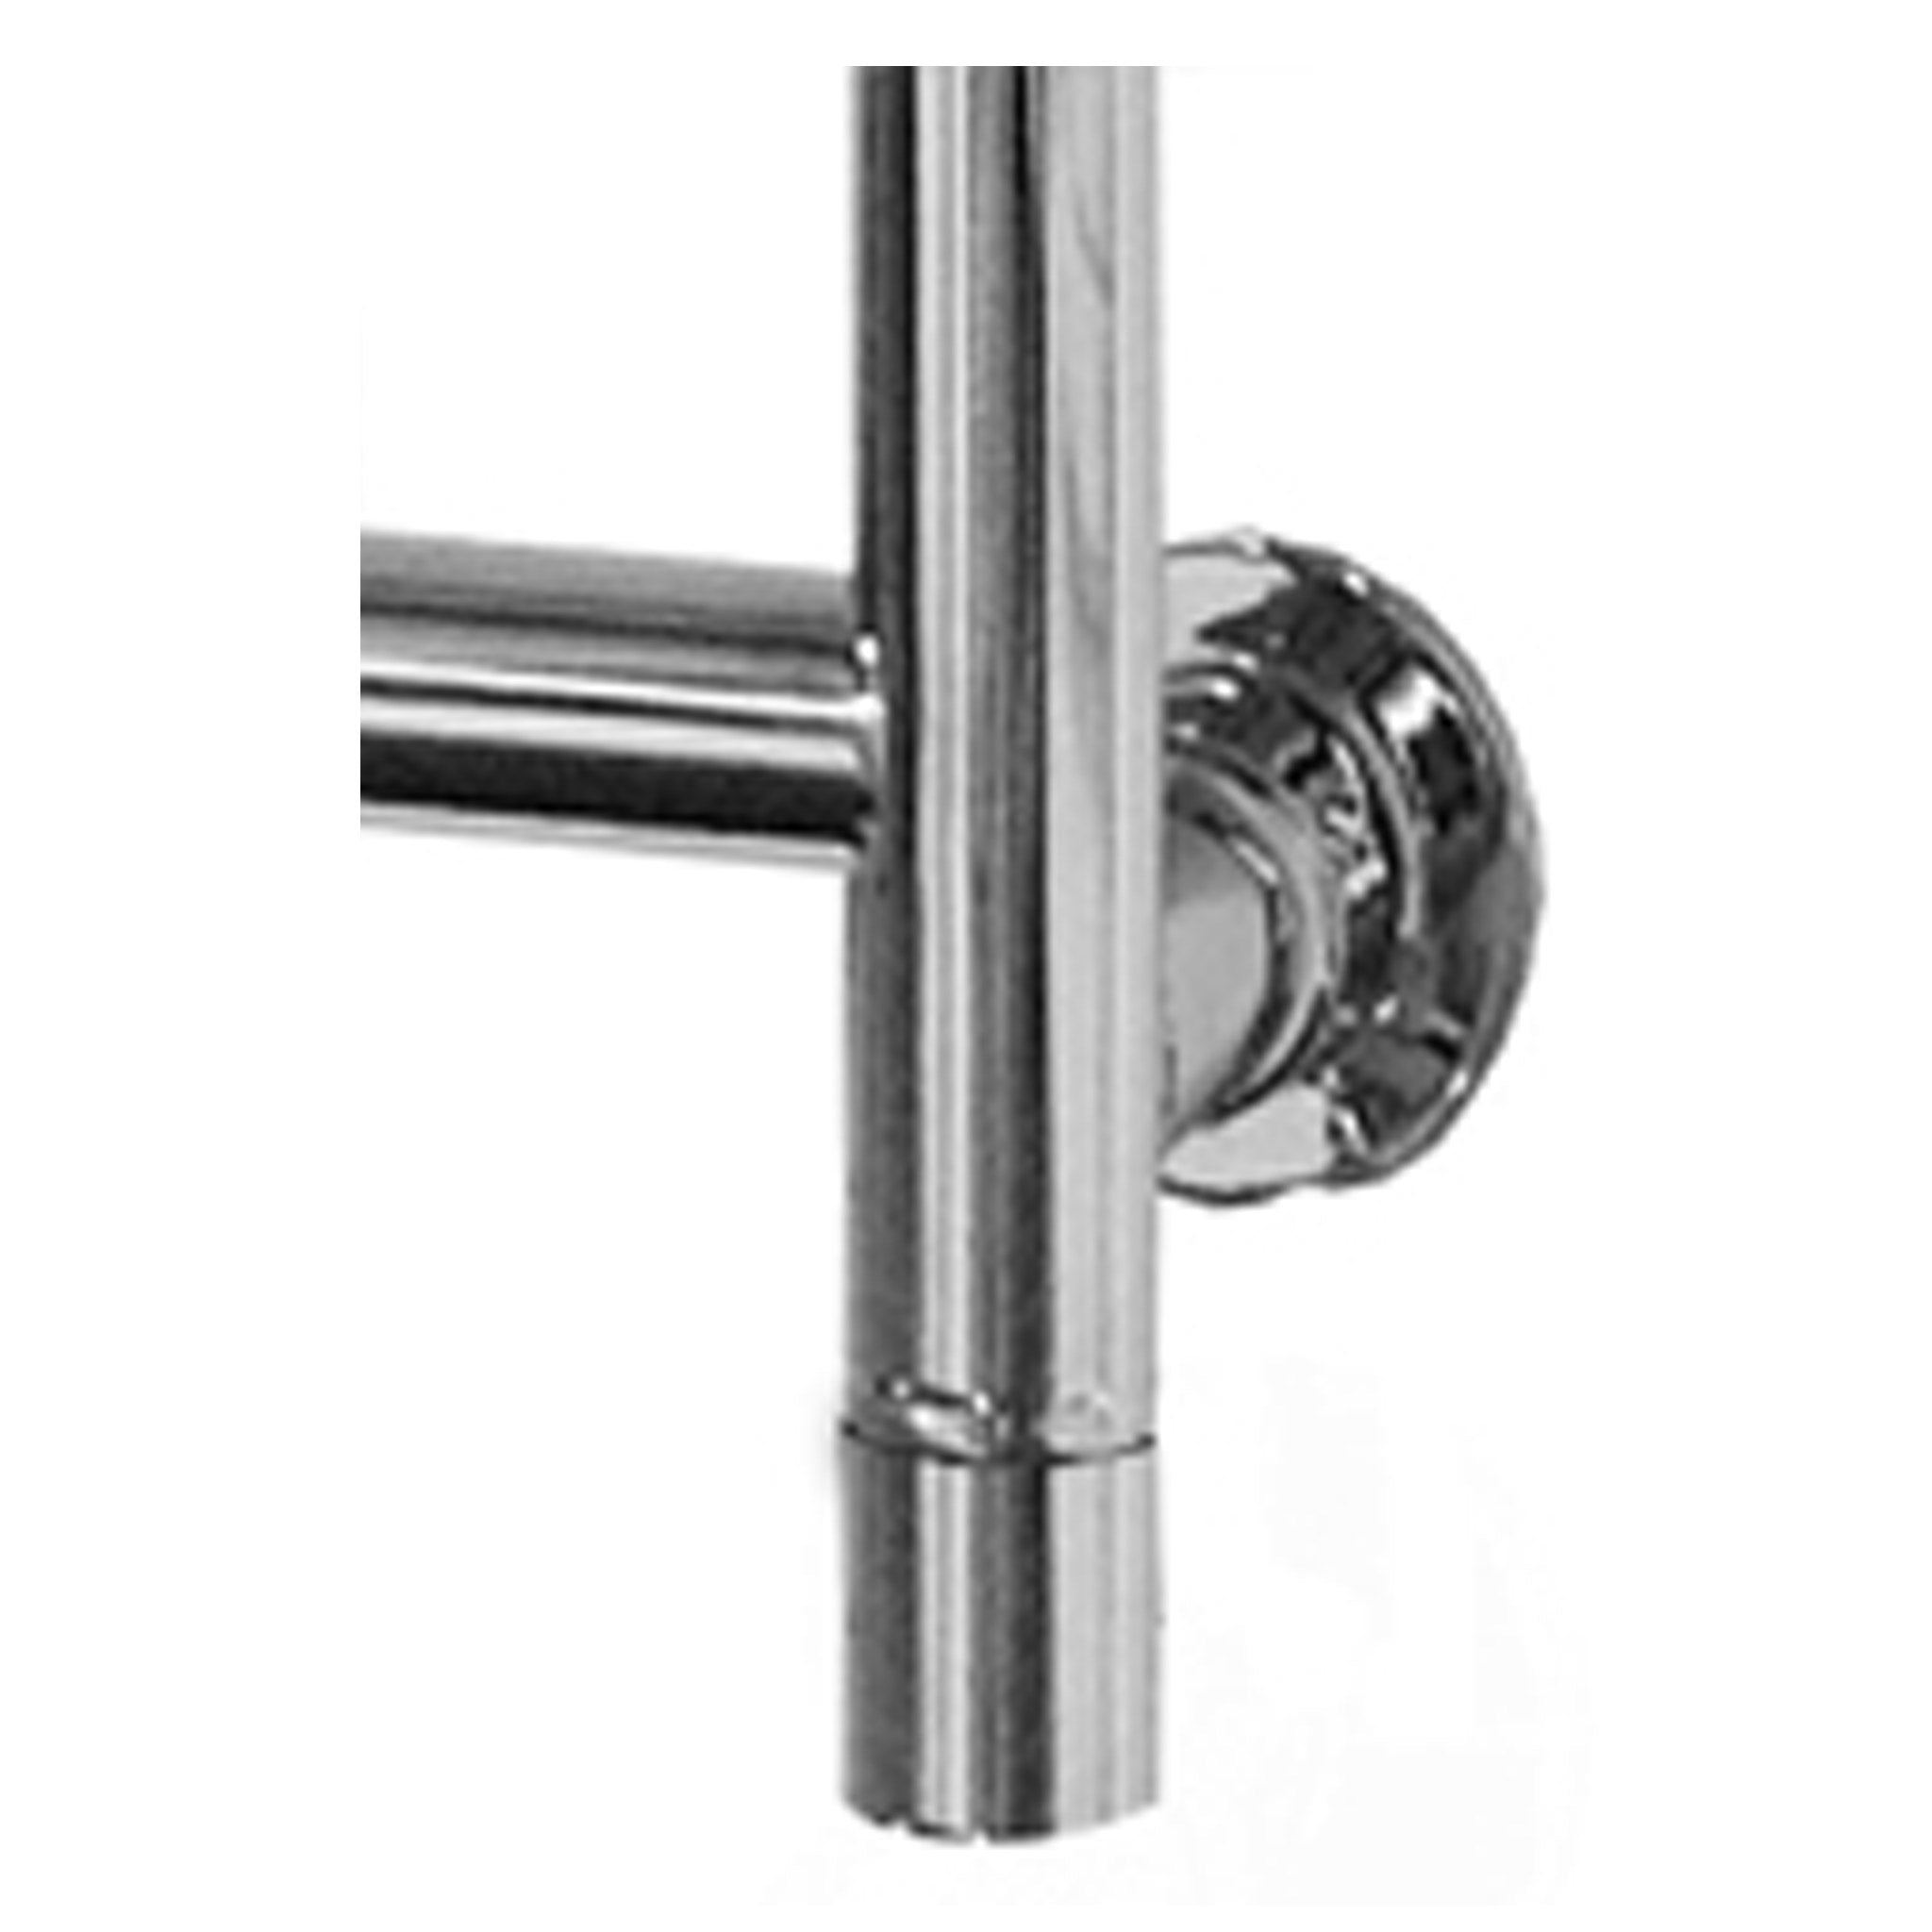 Integral Valve Is Hidden Within The Towel Rail